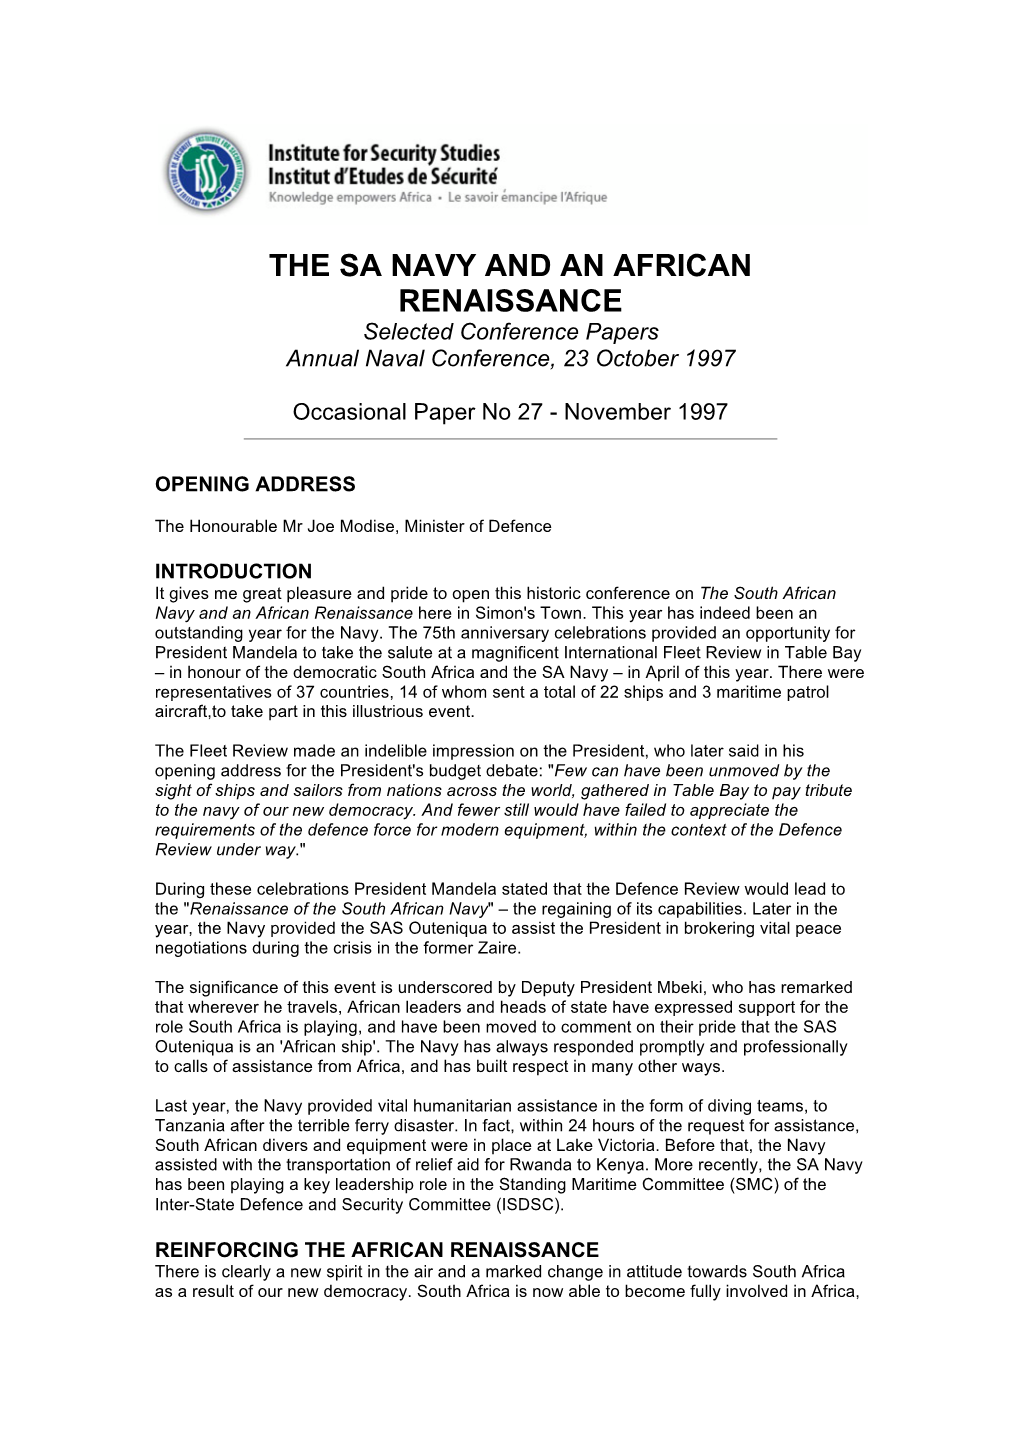 THE SA NAVY and an AFRICAN RENAISSANCE Selected Conference Papers Annual Naval Conference, 23 October 1997